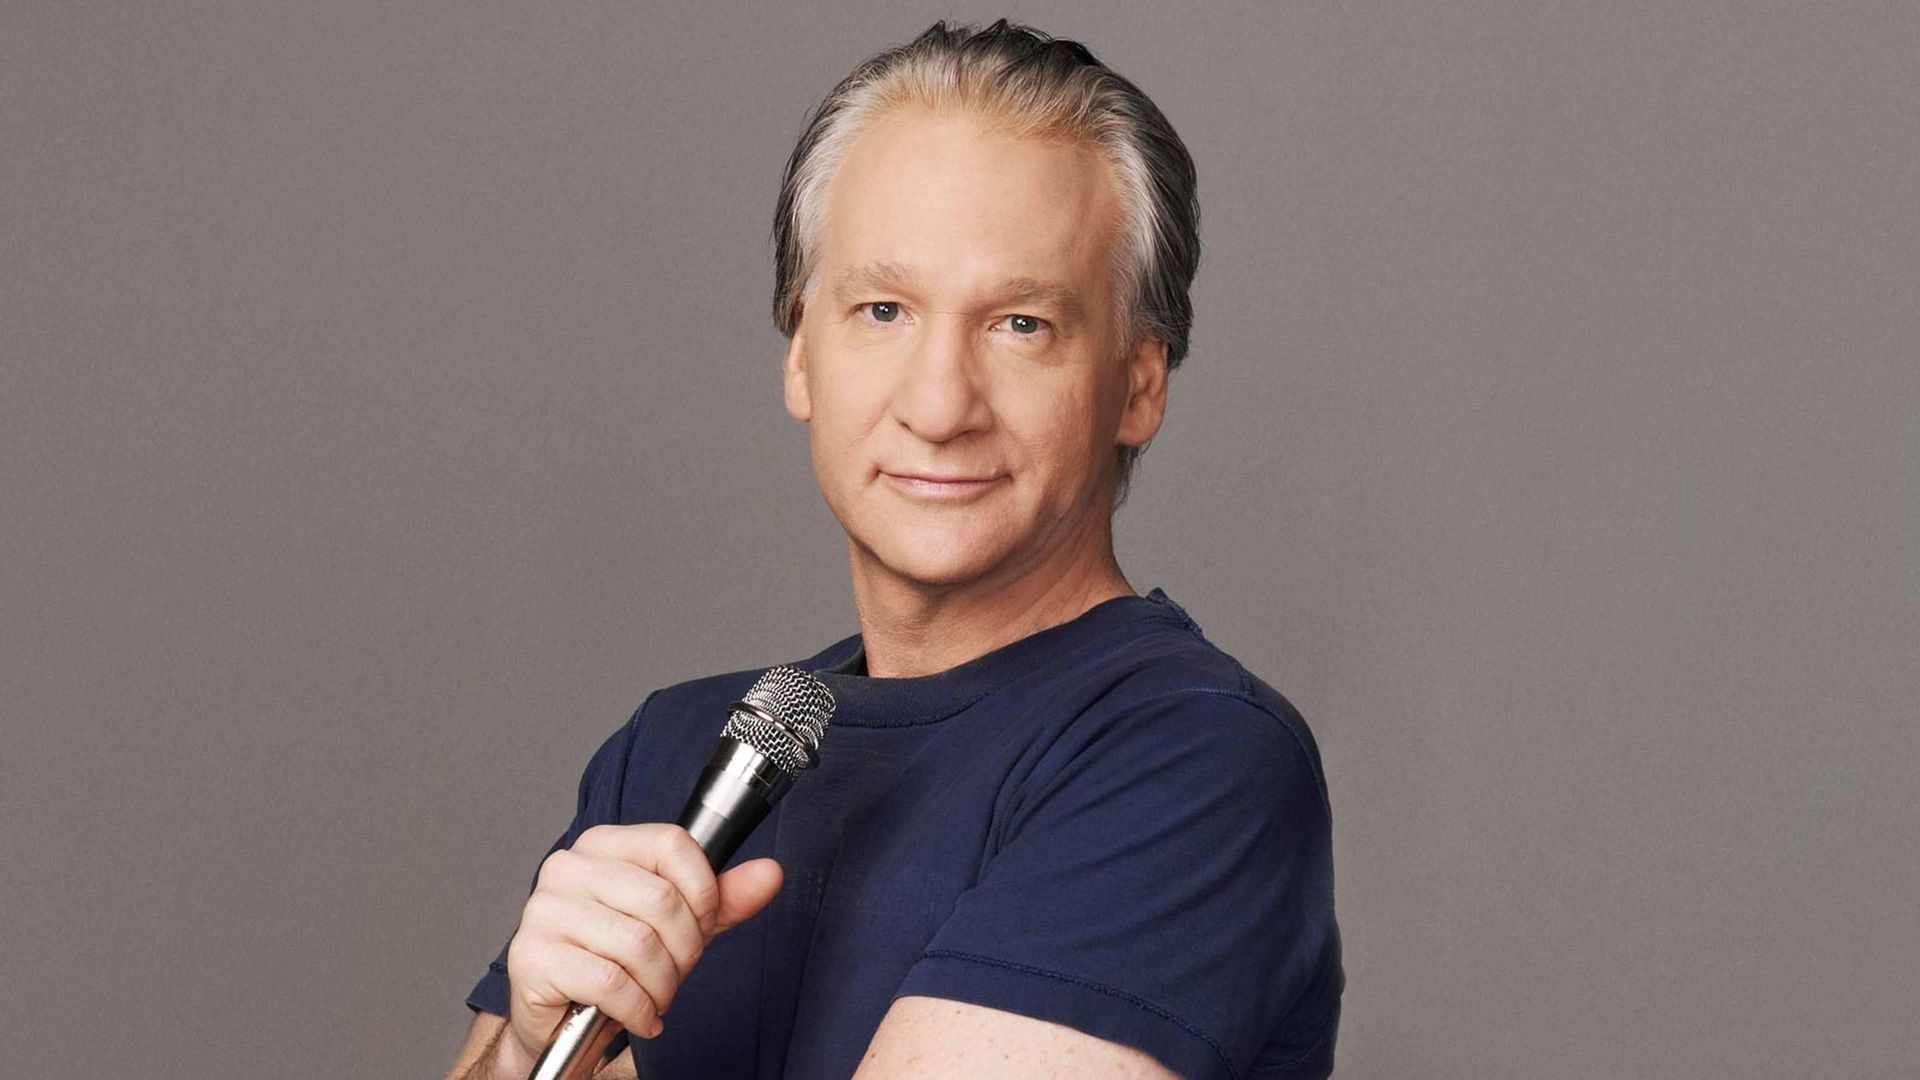 Bill Maher: "... But I'm Not Wrong" Backdrop